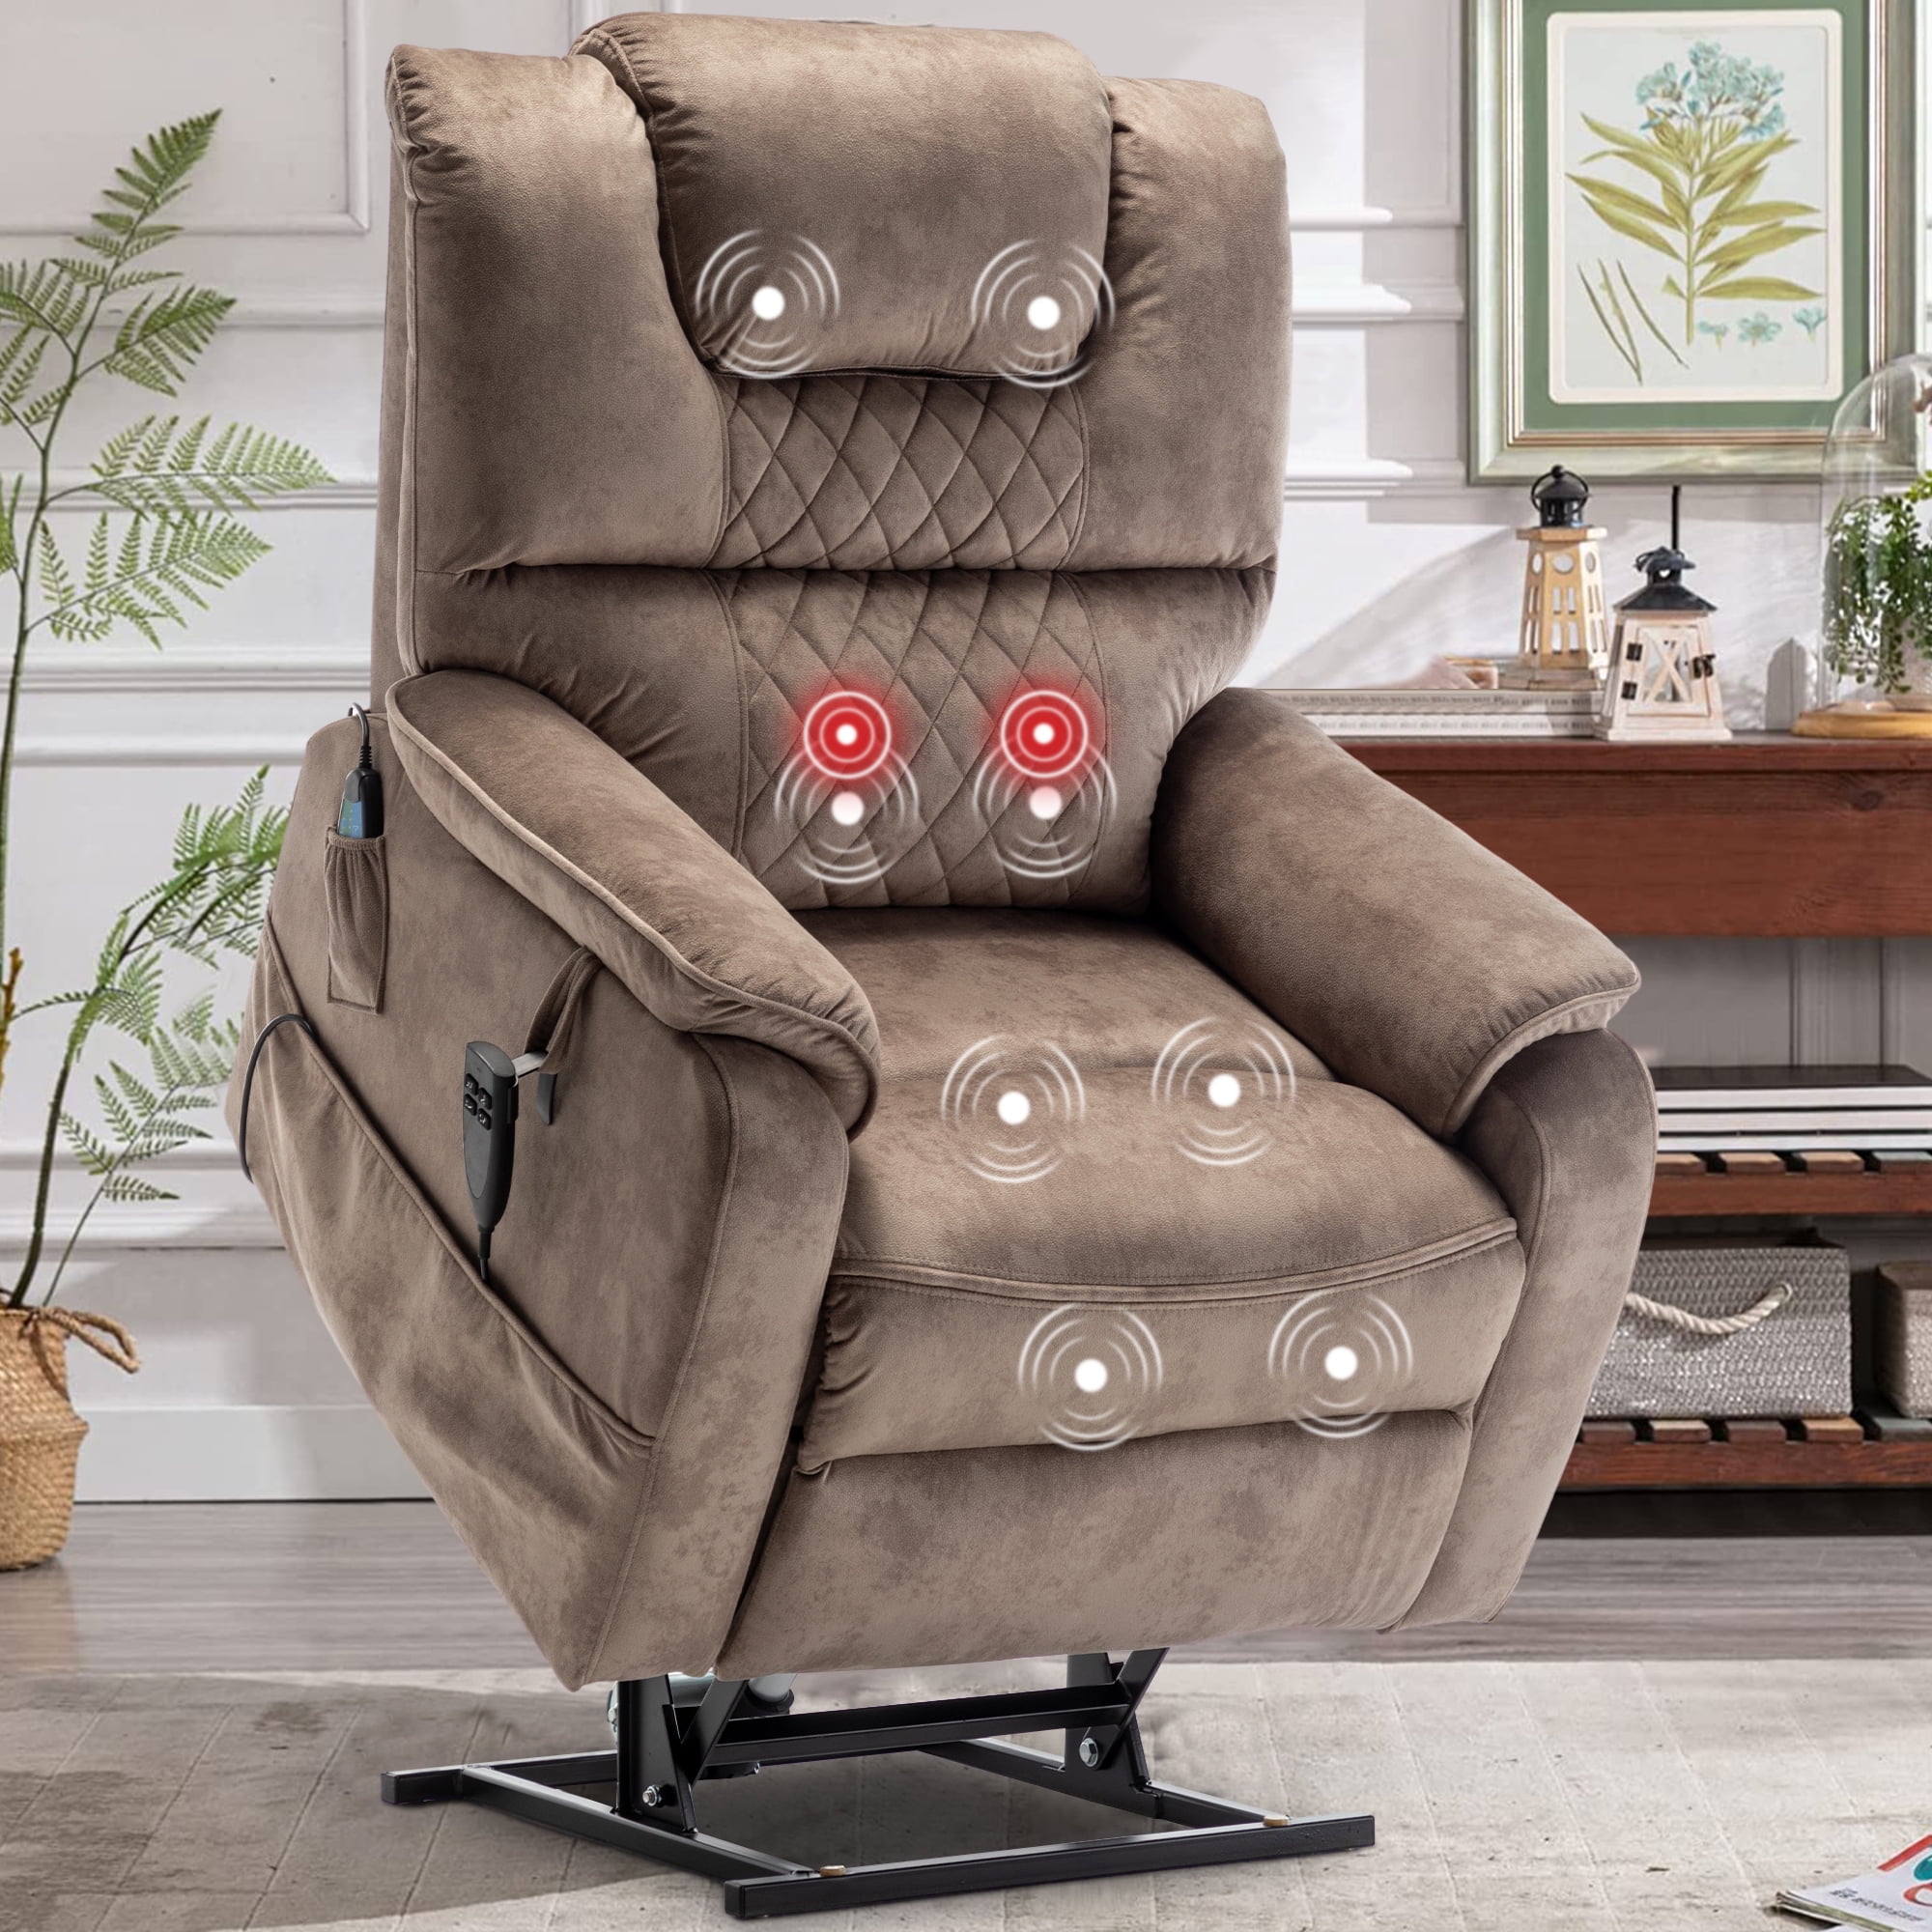 uhomepro Large Massage Recliner Chair, PU Leather Electric Heated Power  Lift Recliner Chairs for Adults Oversize, Recliner Sofa 400 lb Capacity  with 5 Vibration Modes, Heating Cushions, Beige Yellow 